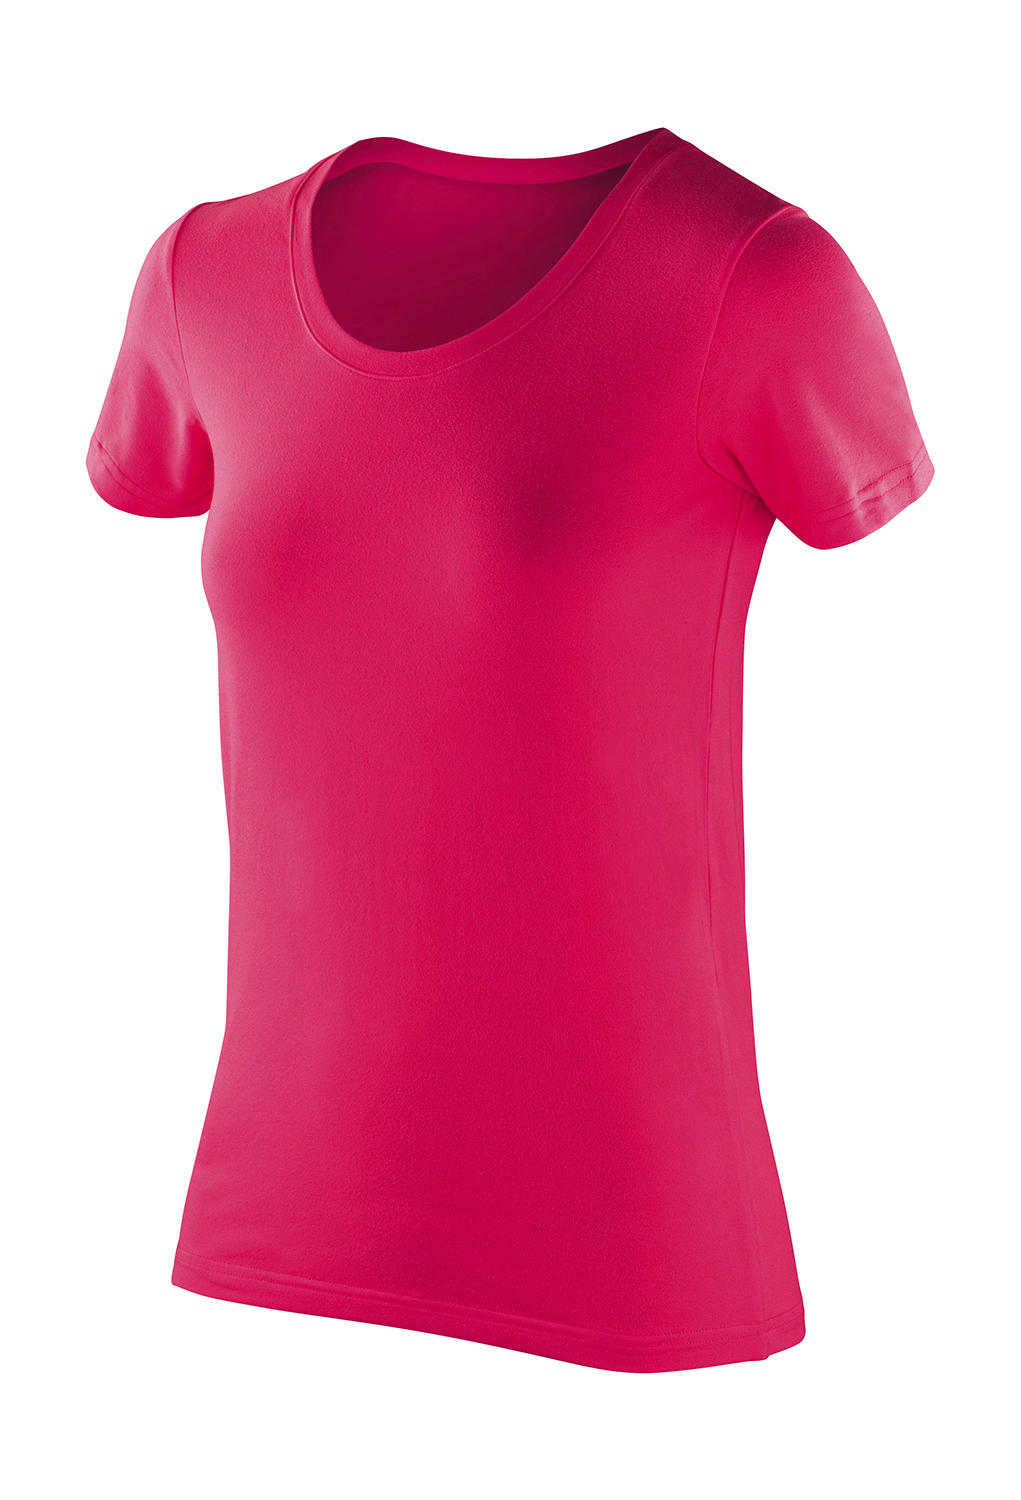  Womens Impact Softex? T-Shirt in Farbe Candy